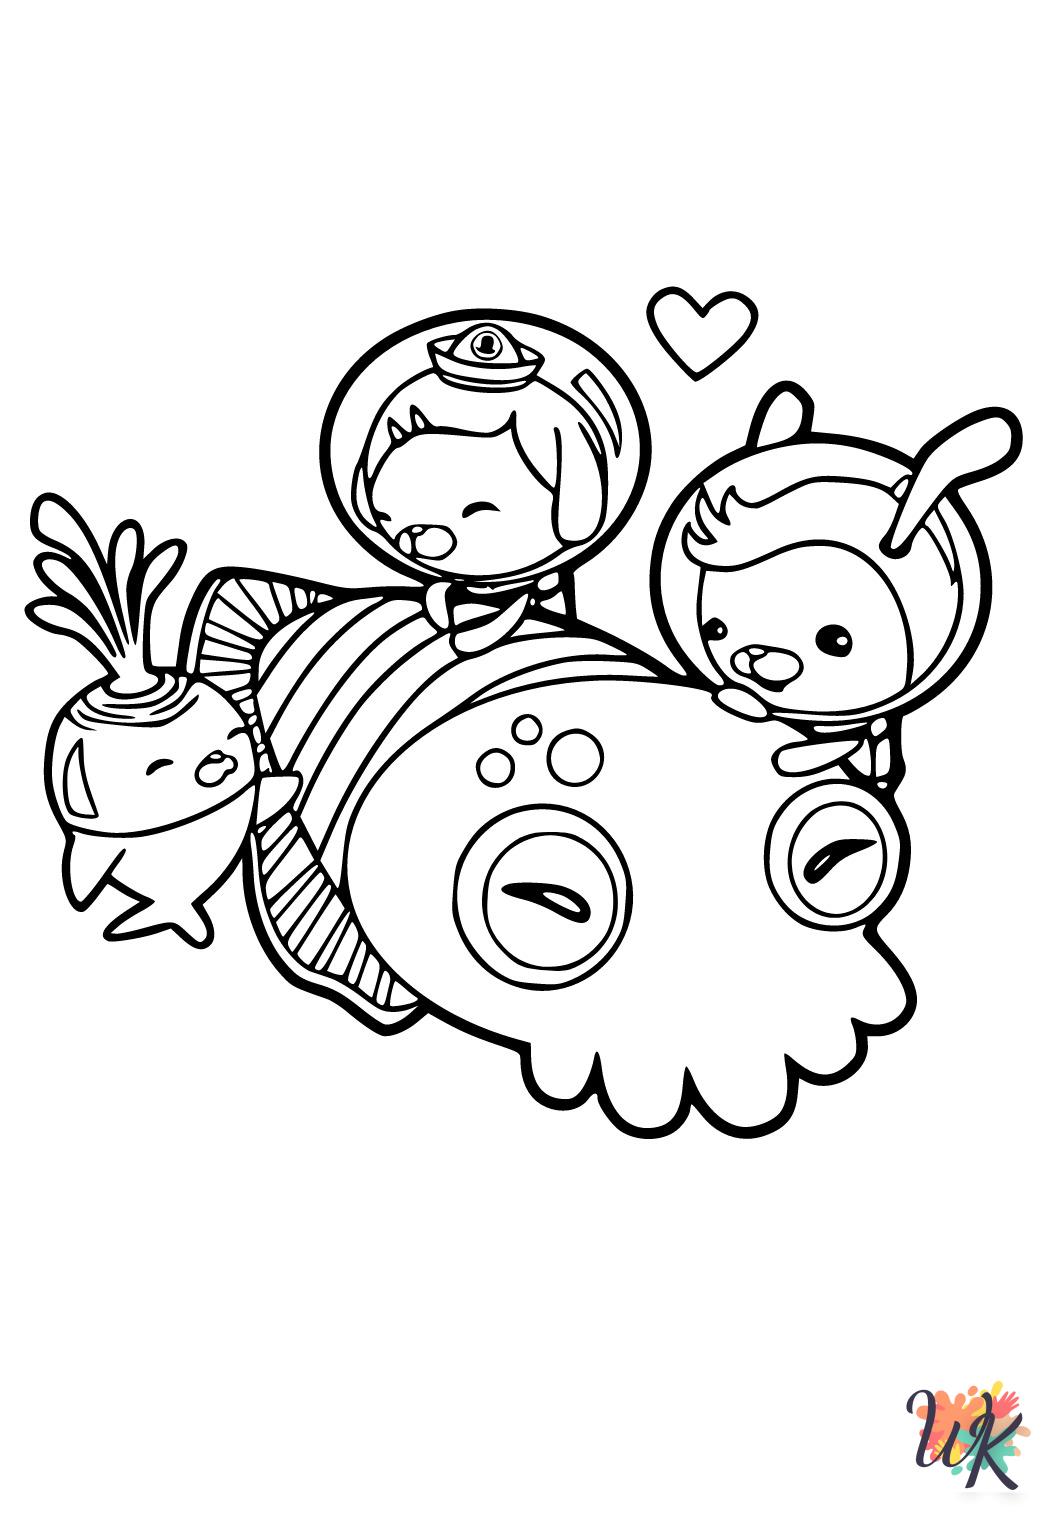 Octonauts themed coloring pages